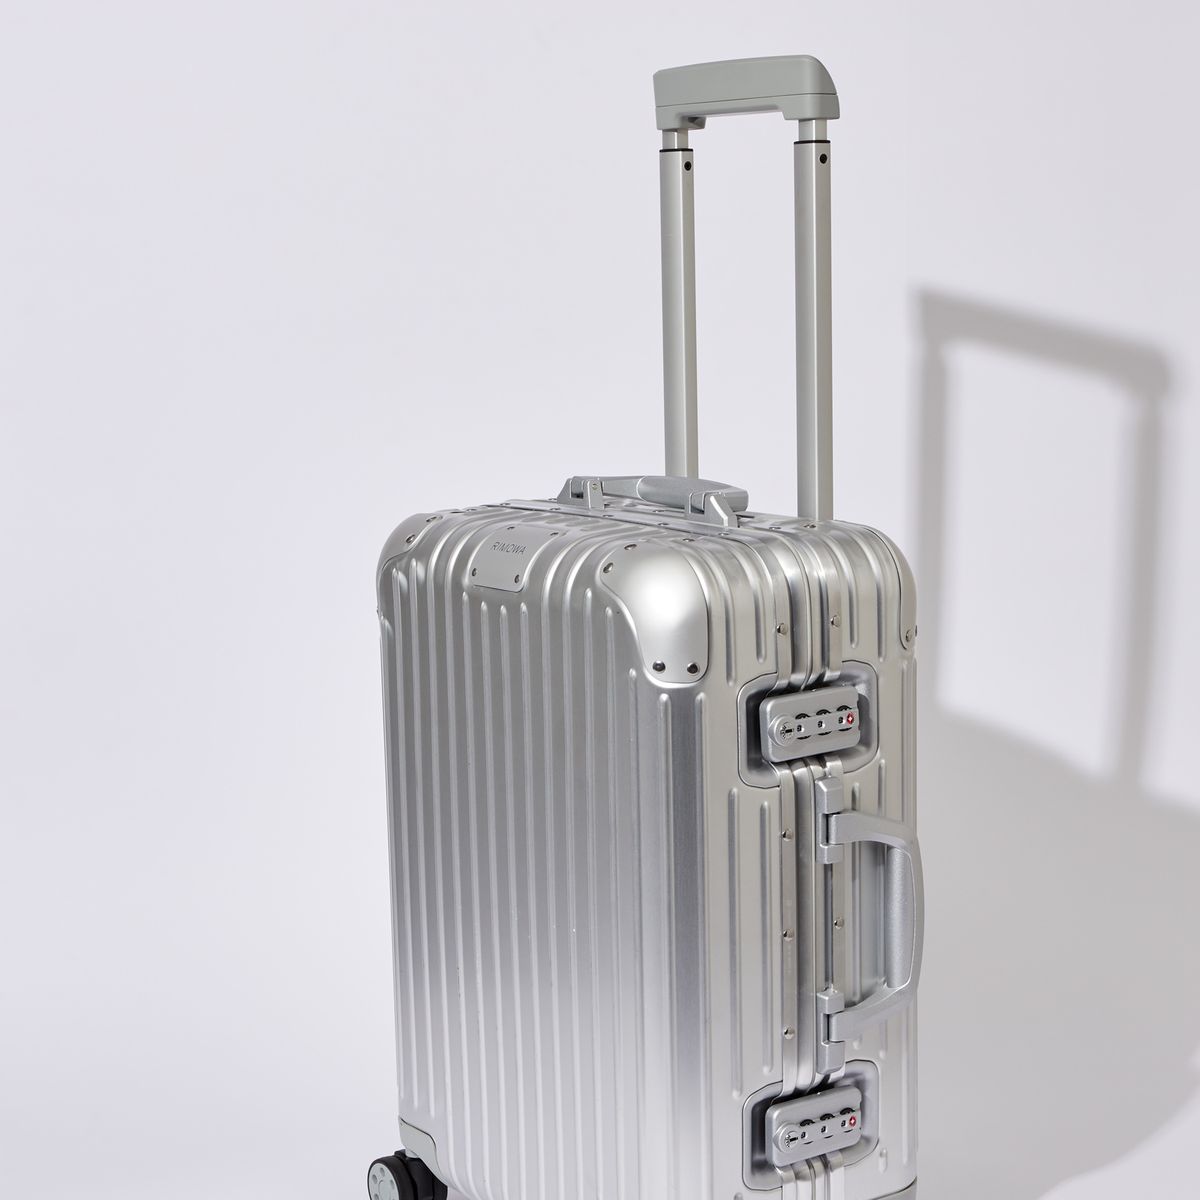 RIMOWA, WATCH THIS BEFORE YOU BUY ANOTHER LUGGAGE/SUITCASE